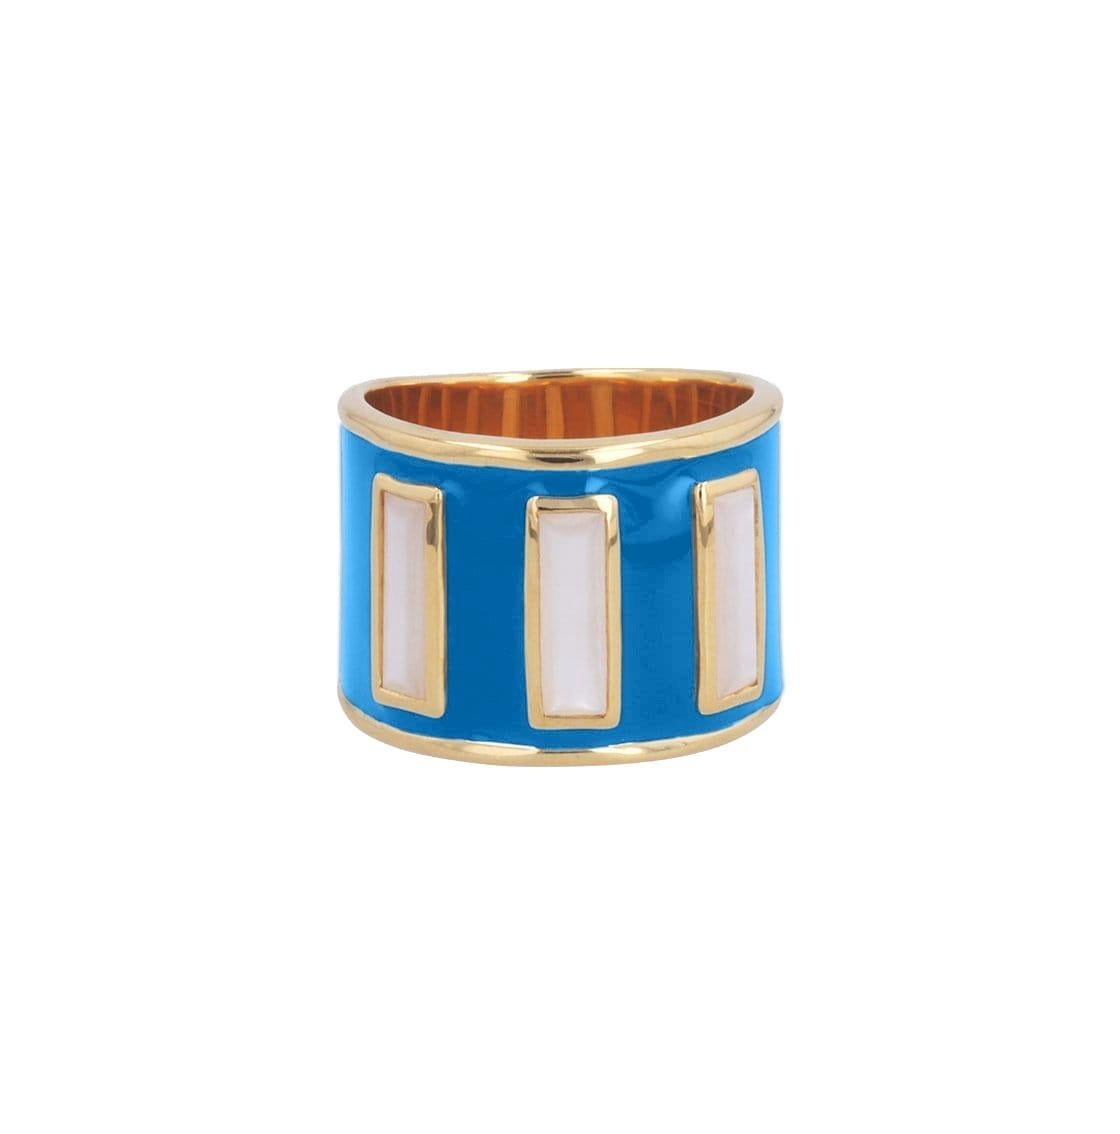 Limited Edition Gigi Enamel Ring in New Colors with Mother of Pearl For Sale 1